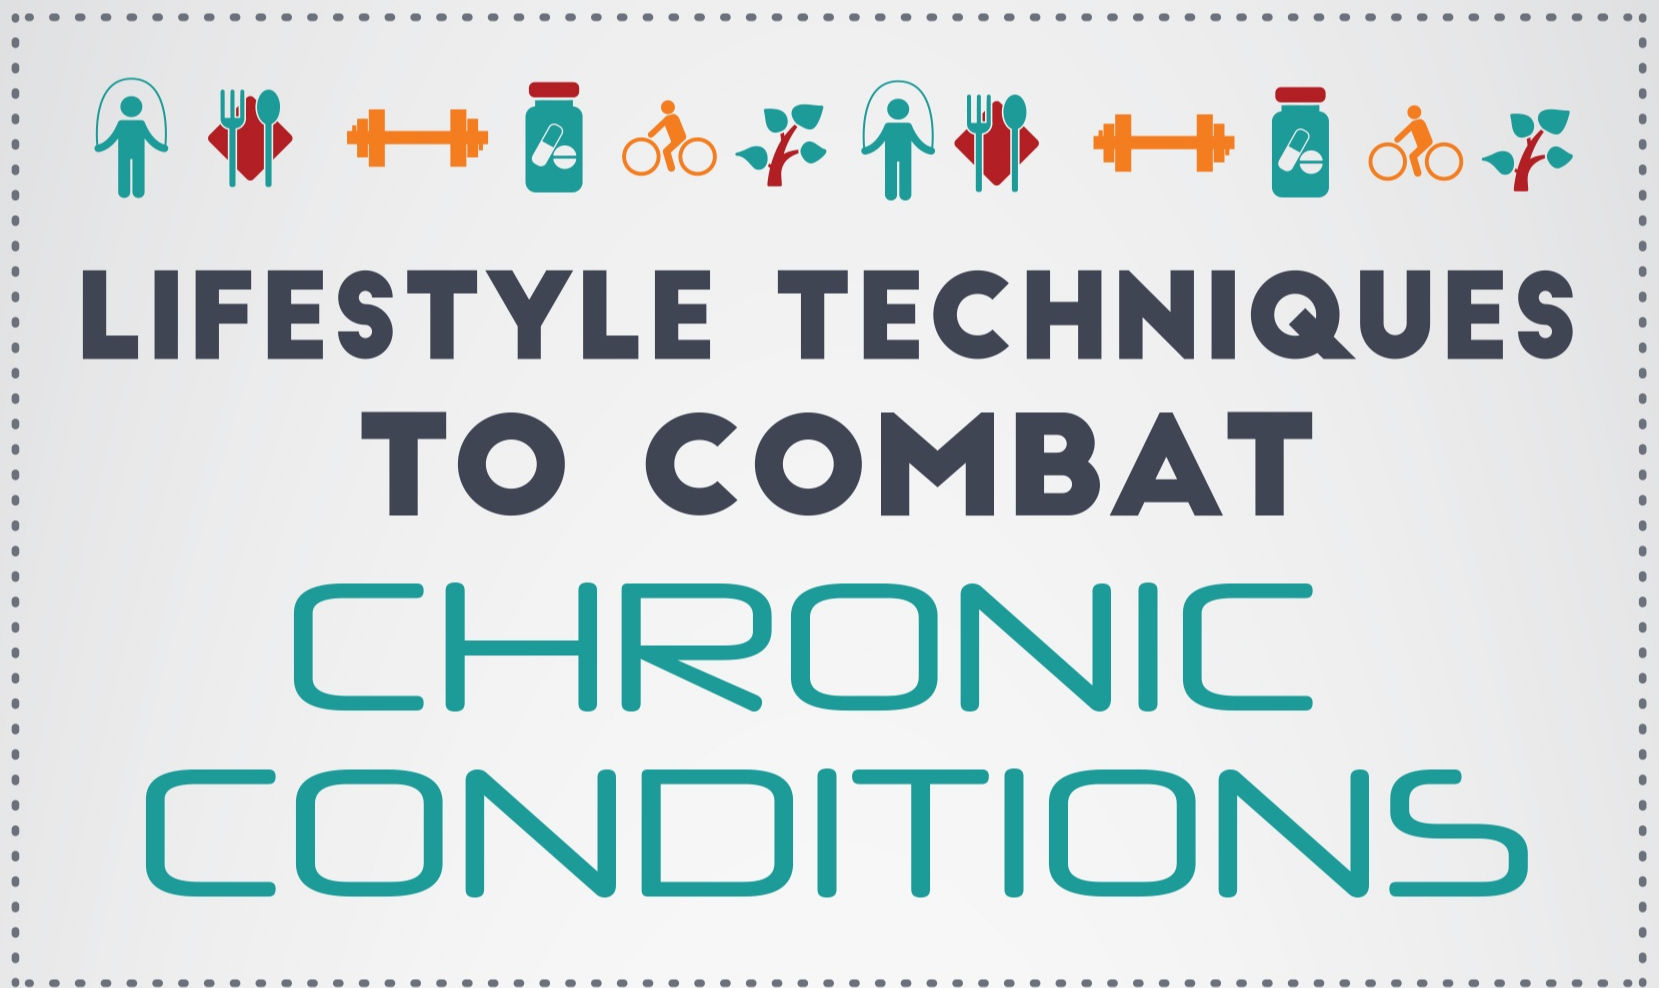 Lifestyle Techniques to Combat Chronic Conditions